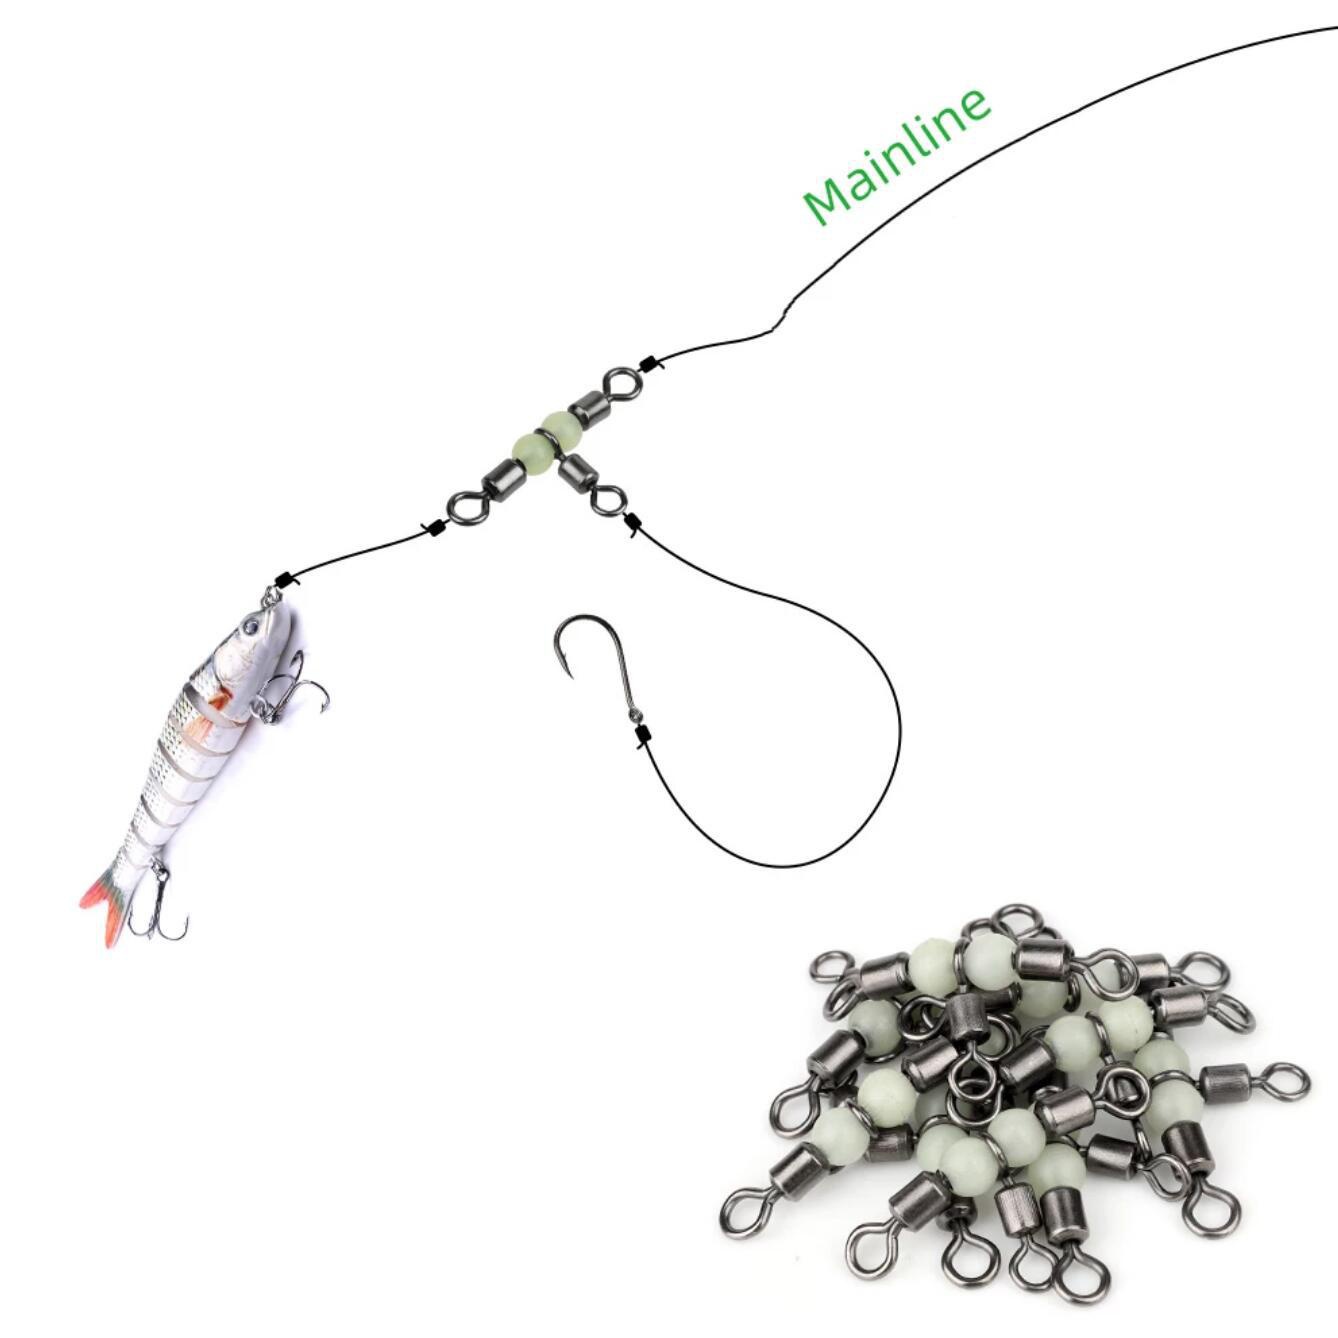 10/20pcs Fishing Bead Chain Rolling Swivel Ball Bearing High Speed Trolling  Lure Hook Connector Catfish Trout Rig Saltwater